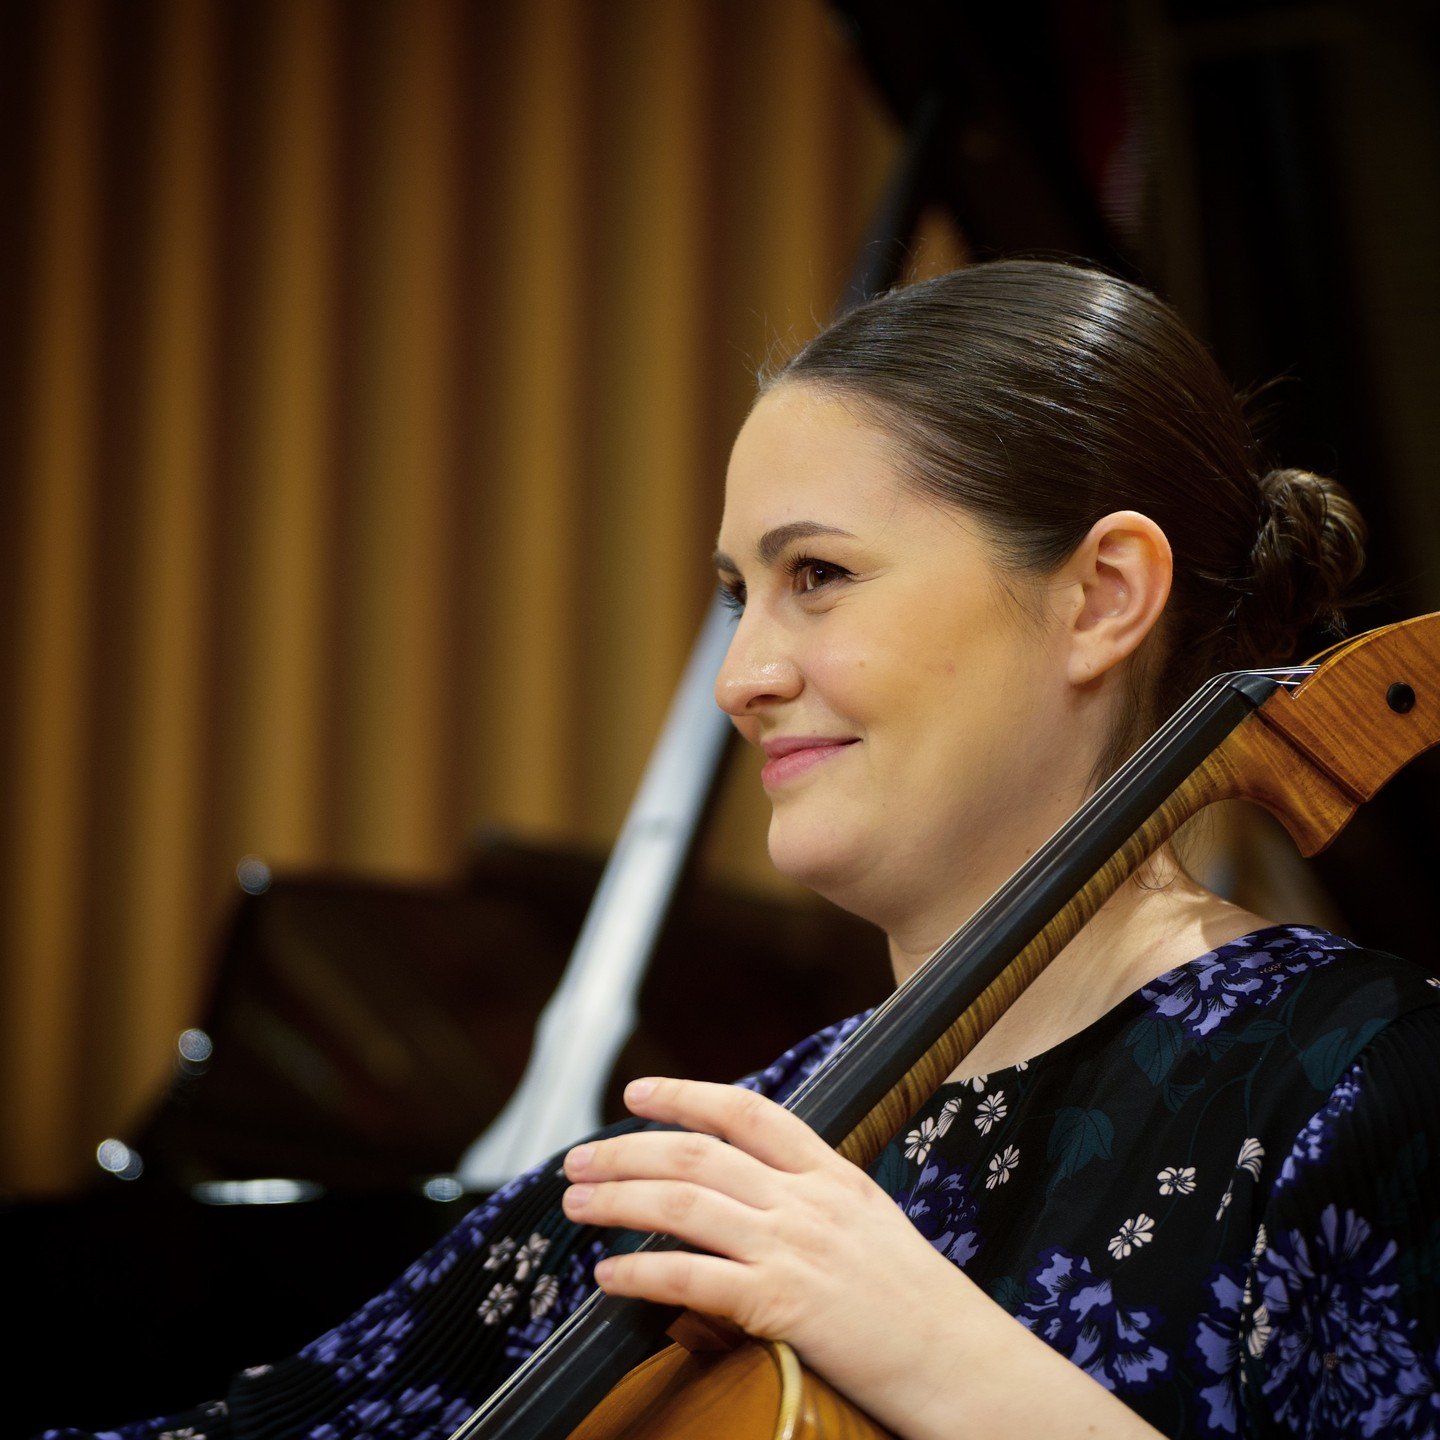 Our season finale features the premiere of a new cello solo piece, &quot;Concertino for Cello and String Orchestra,&quot; composed by sethgrosshandler and performed by @mcfayette. Maddy, in her ninth season with us, has consistently been one of our m